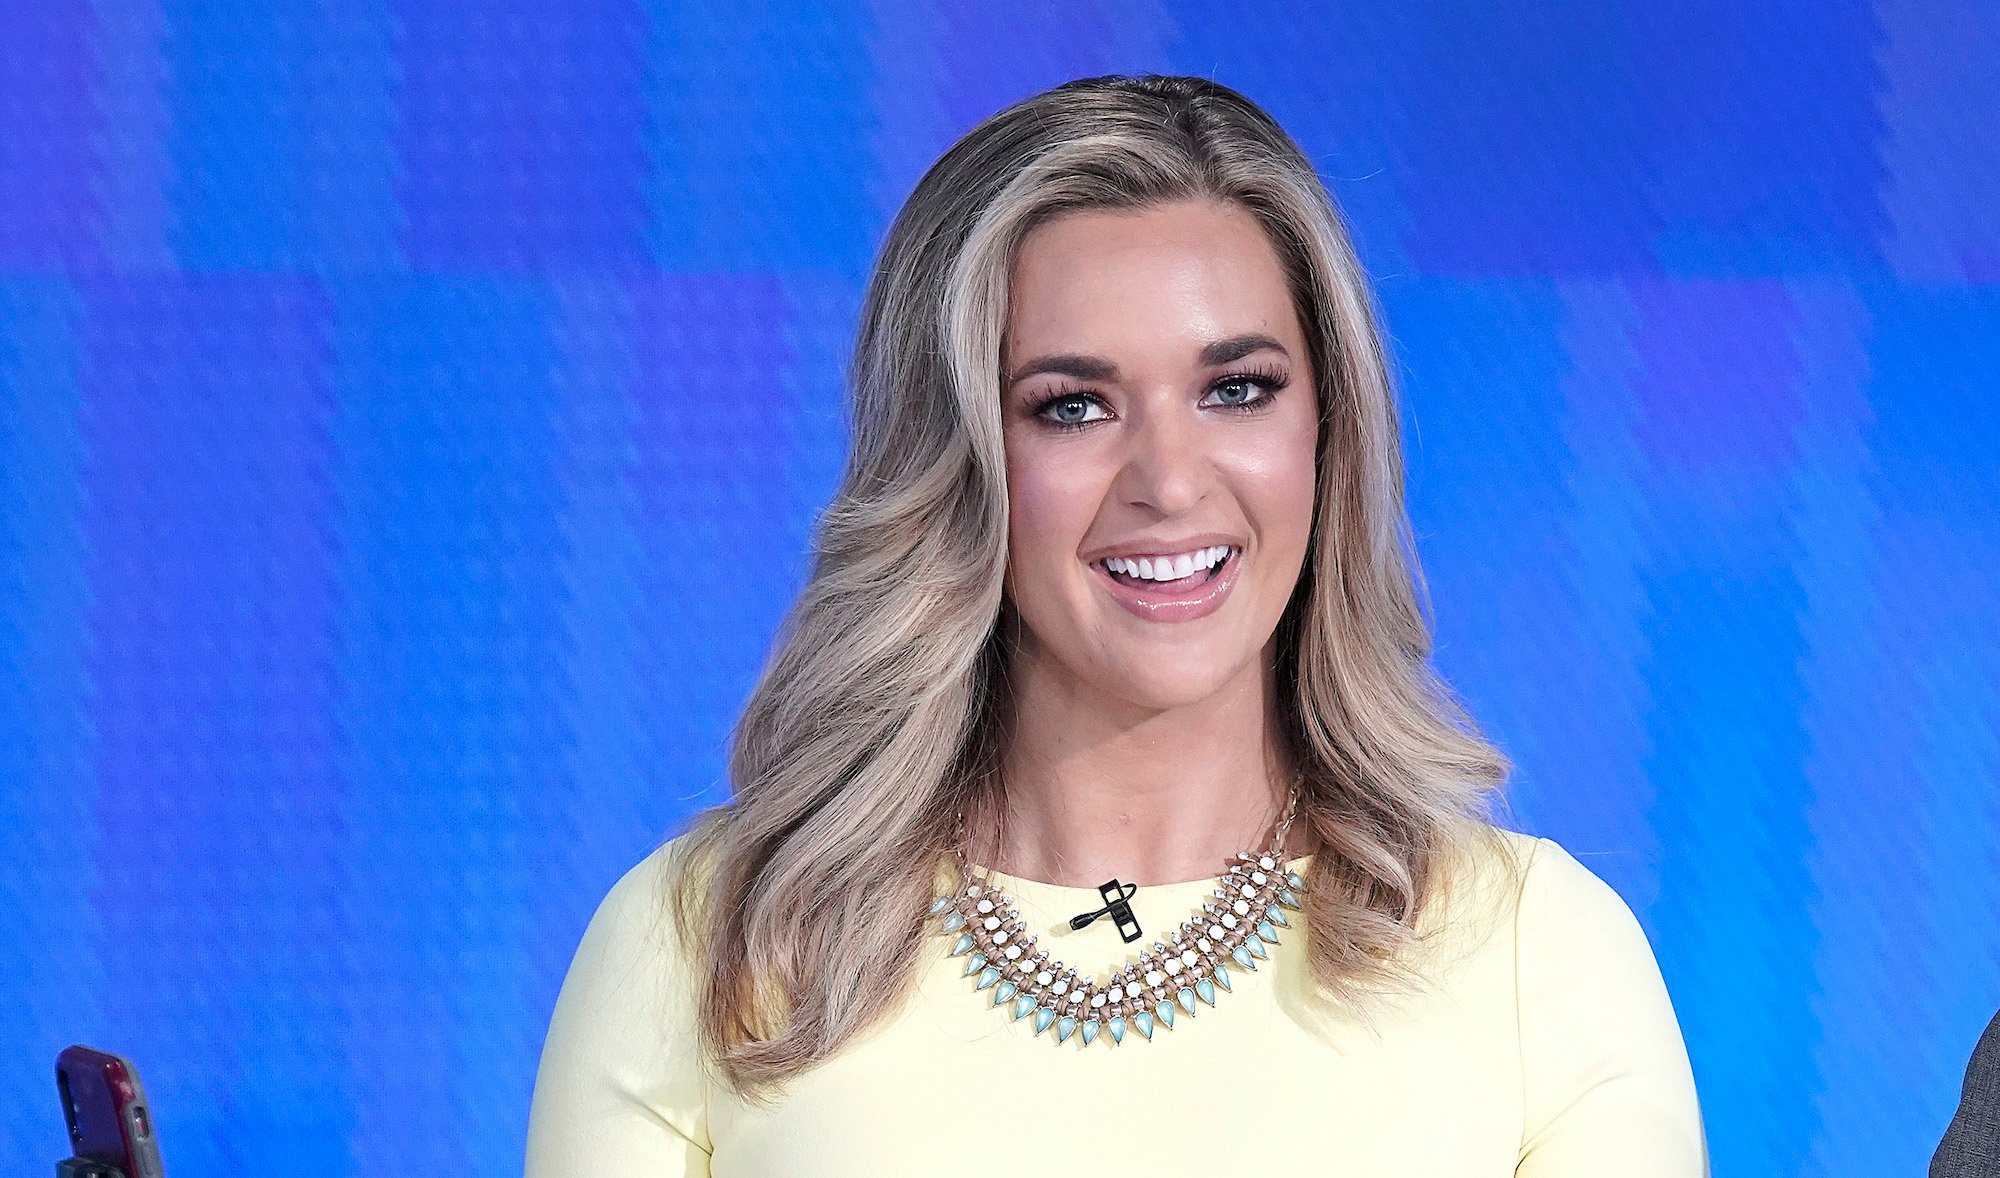 Katie Pavlich smiling in front of a blue background